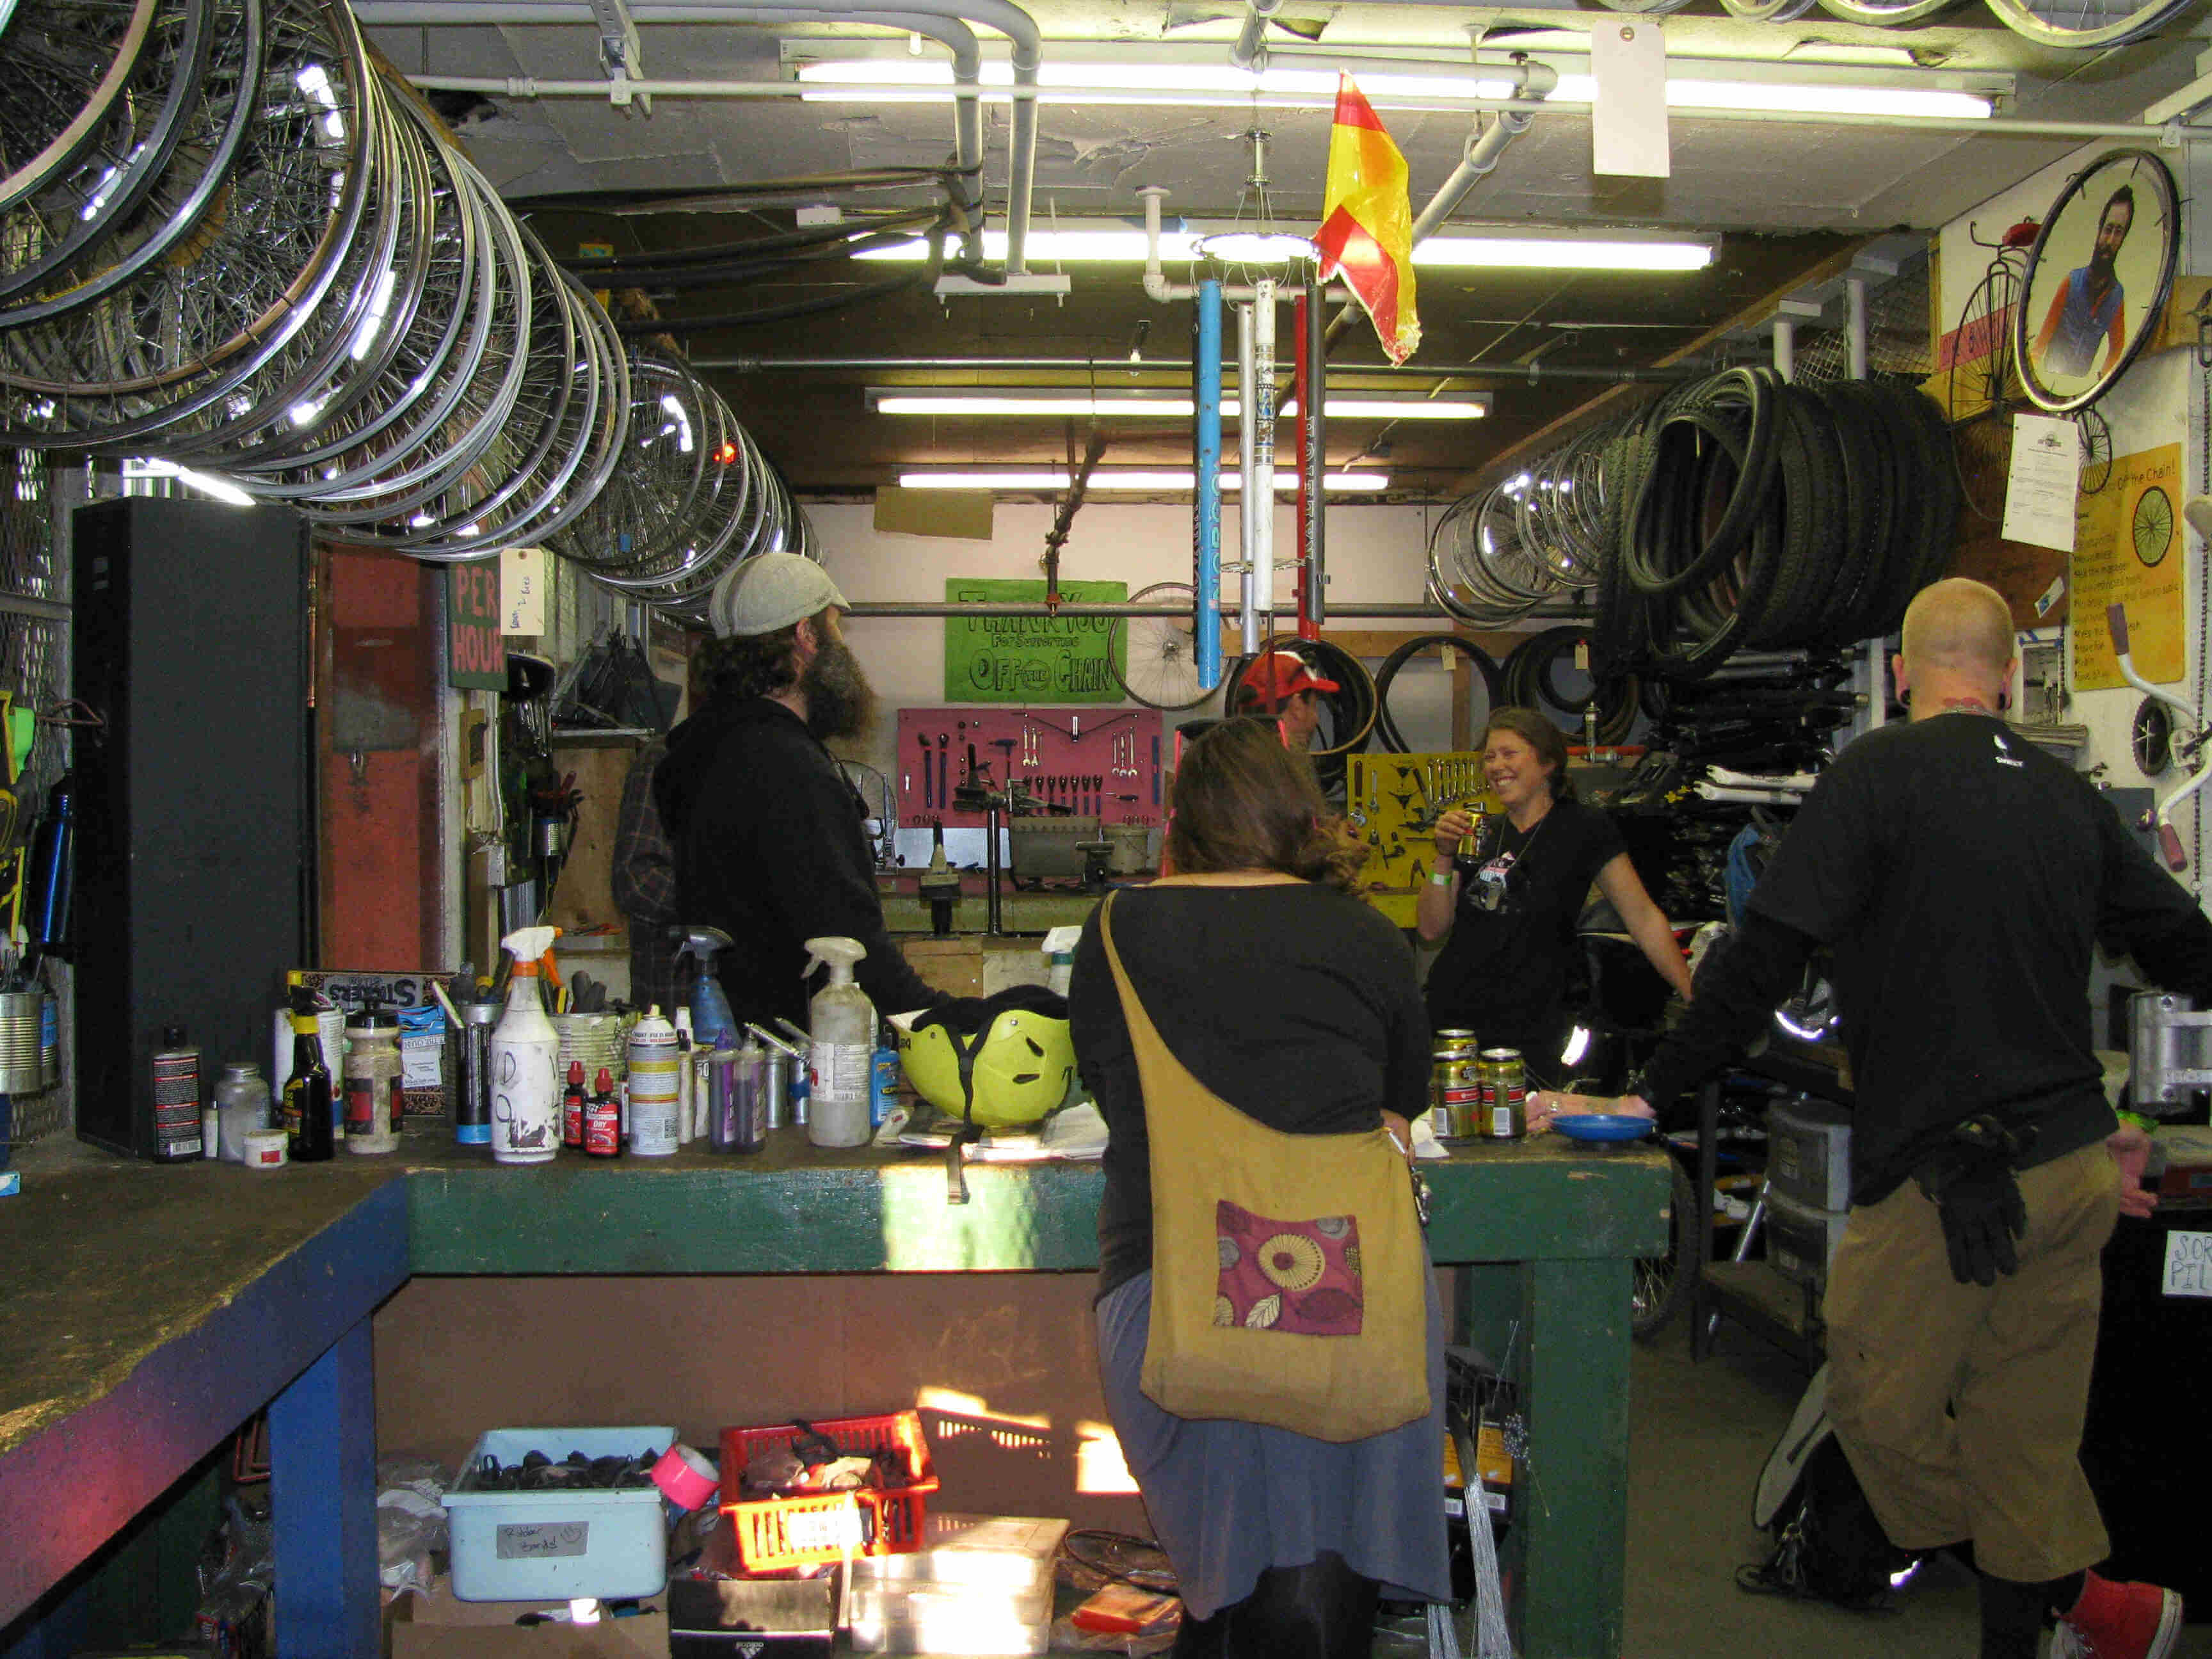 Rear view of 2 people standing near a workbench, talking to other people, in a bike shop